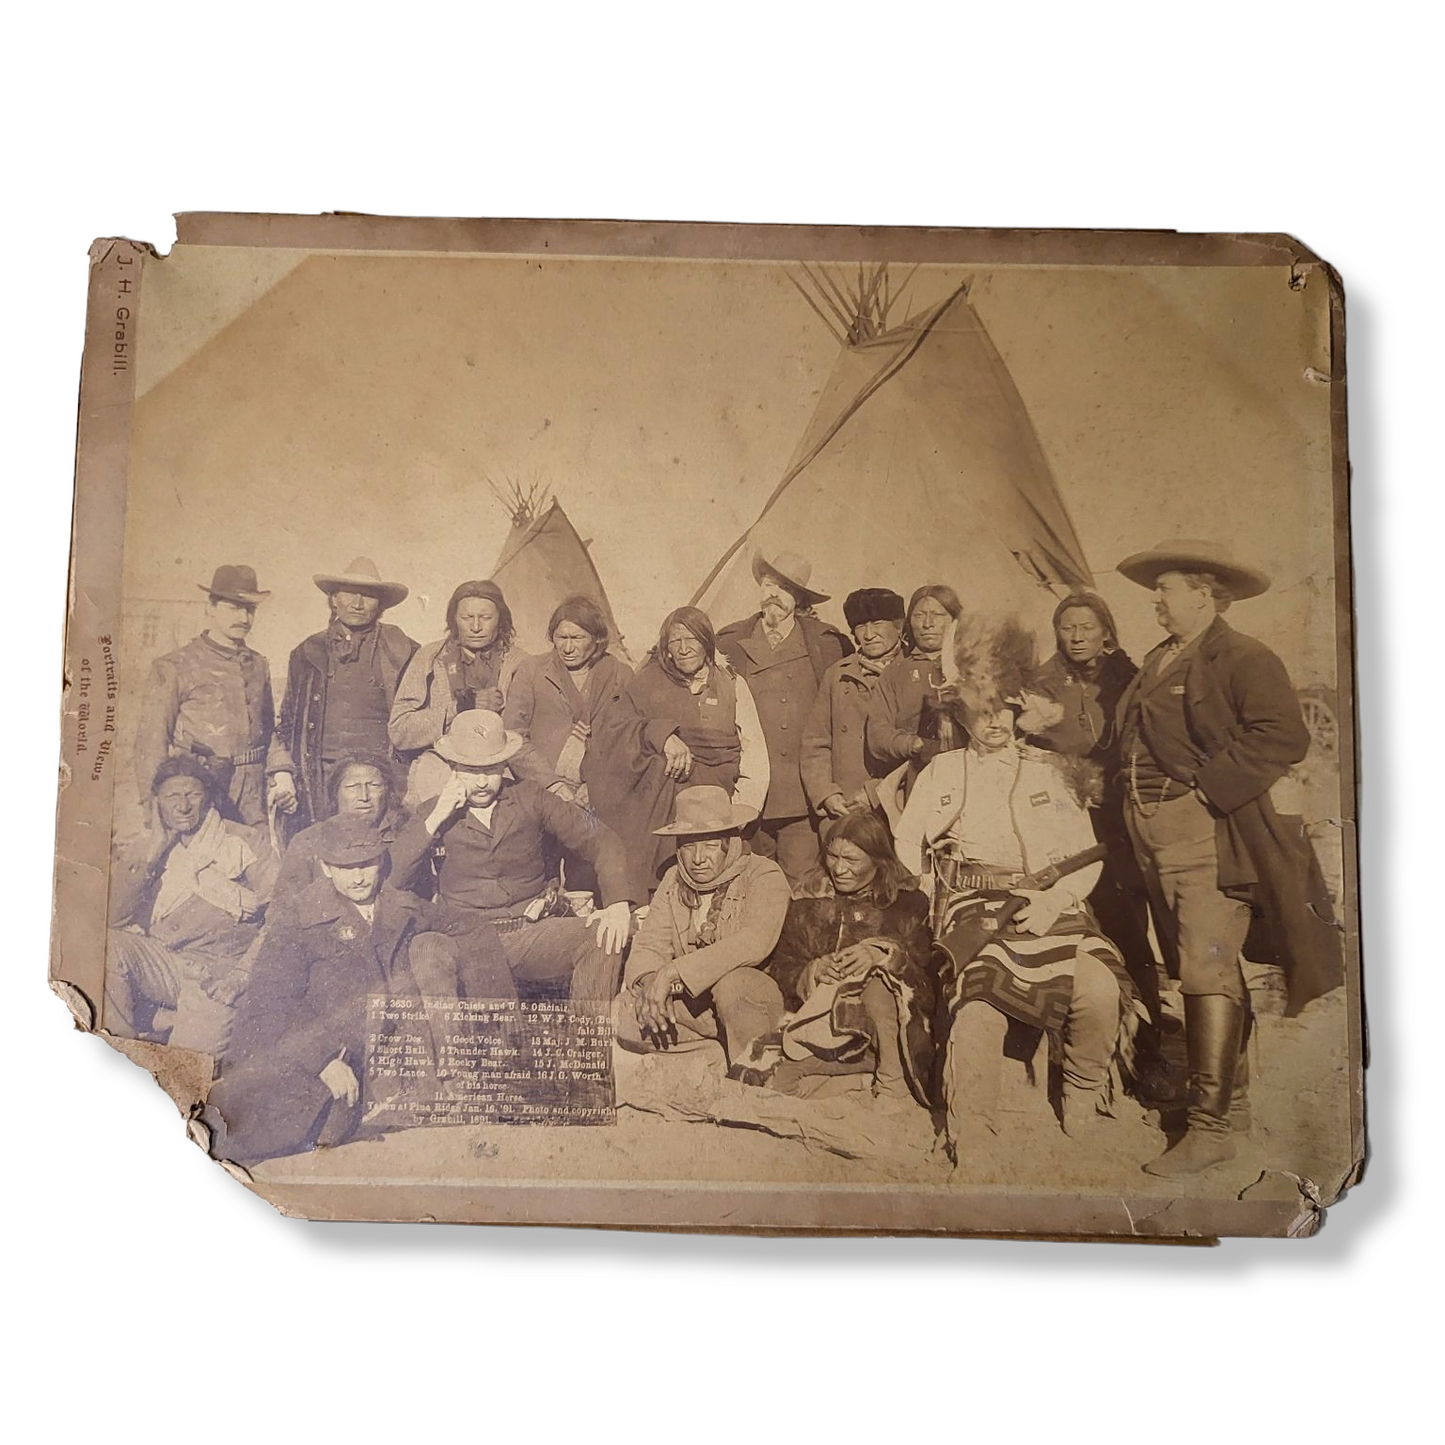 "Indian Chiefs And U.S. Officials" Photograph by J. H. Grabill - 1891 - Includes William "Buffalo Bill" Cody